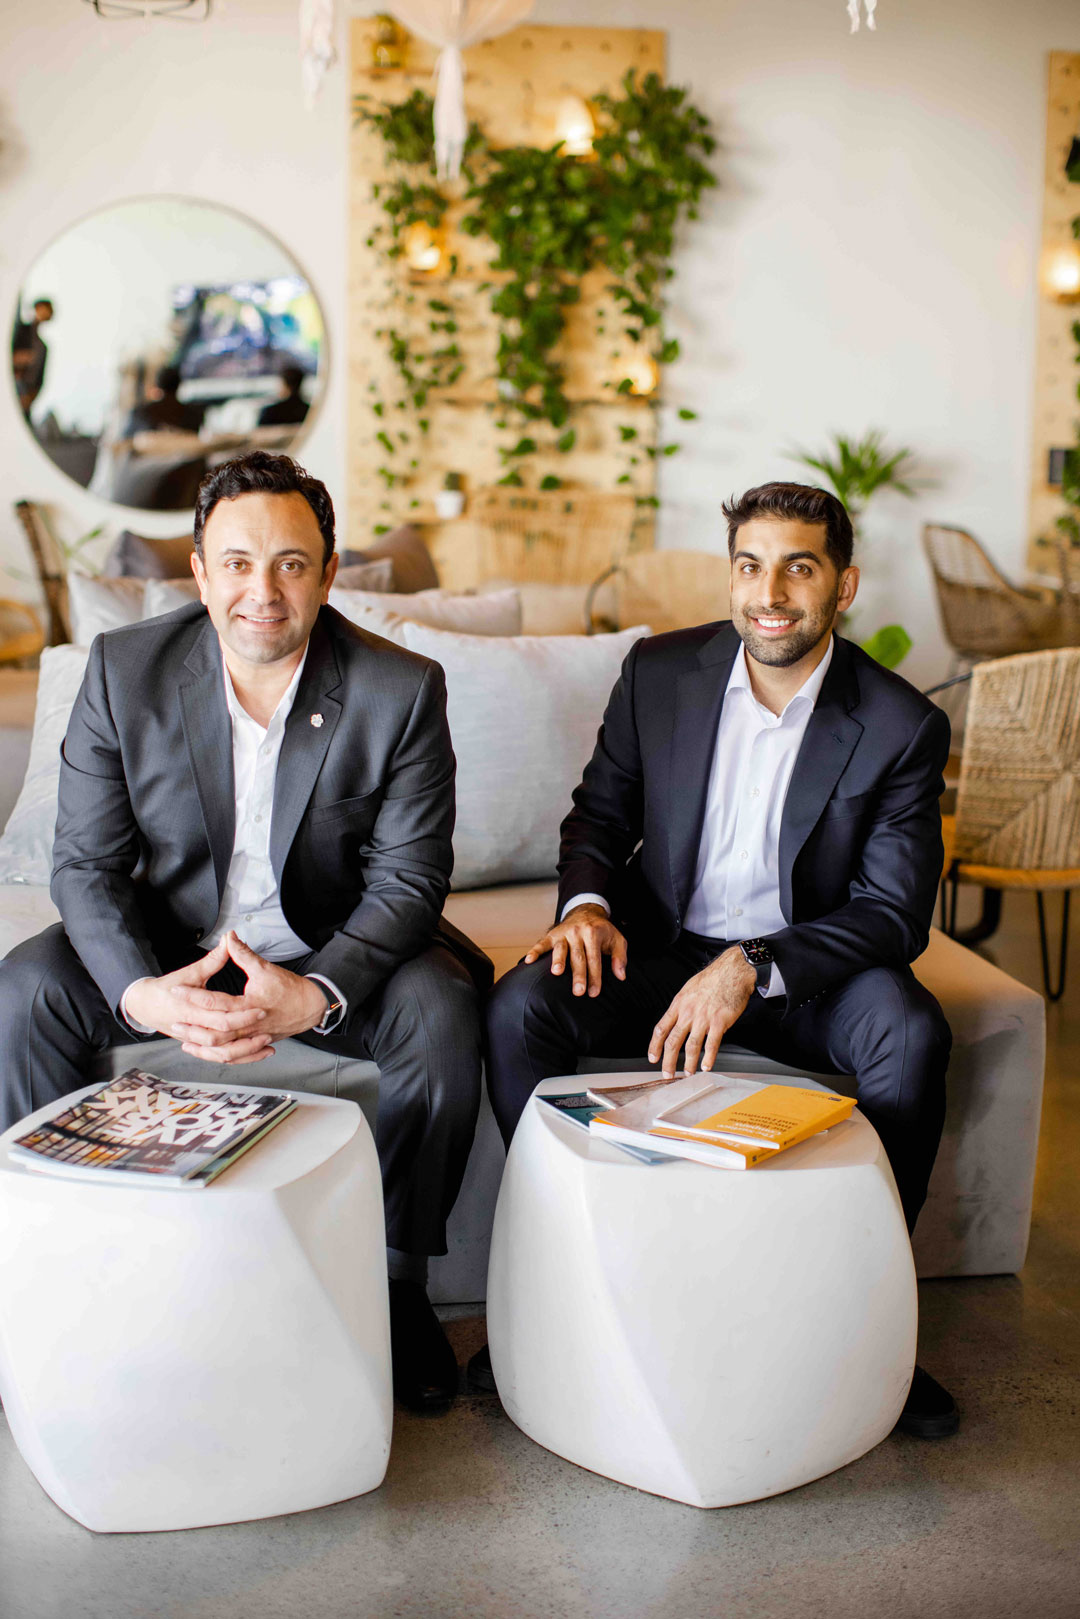 Michael Alladawi and Dalip Jaggi founders of Revive